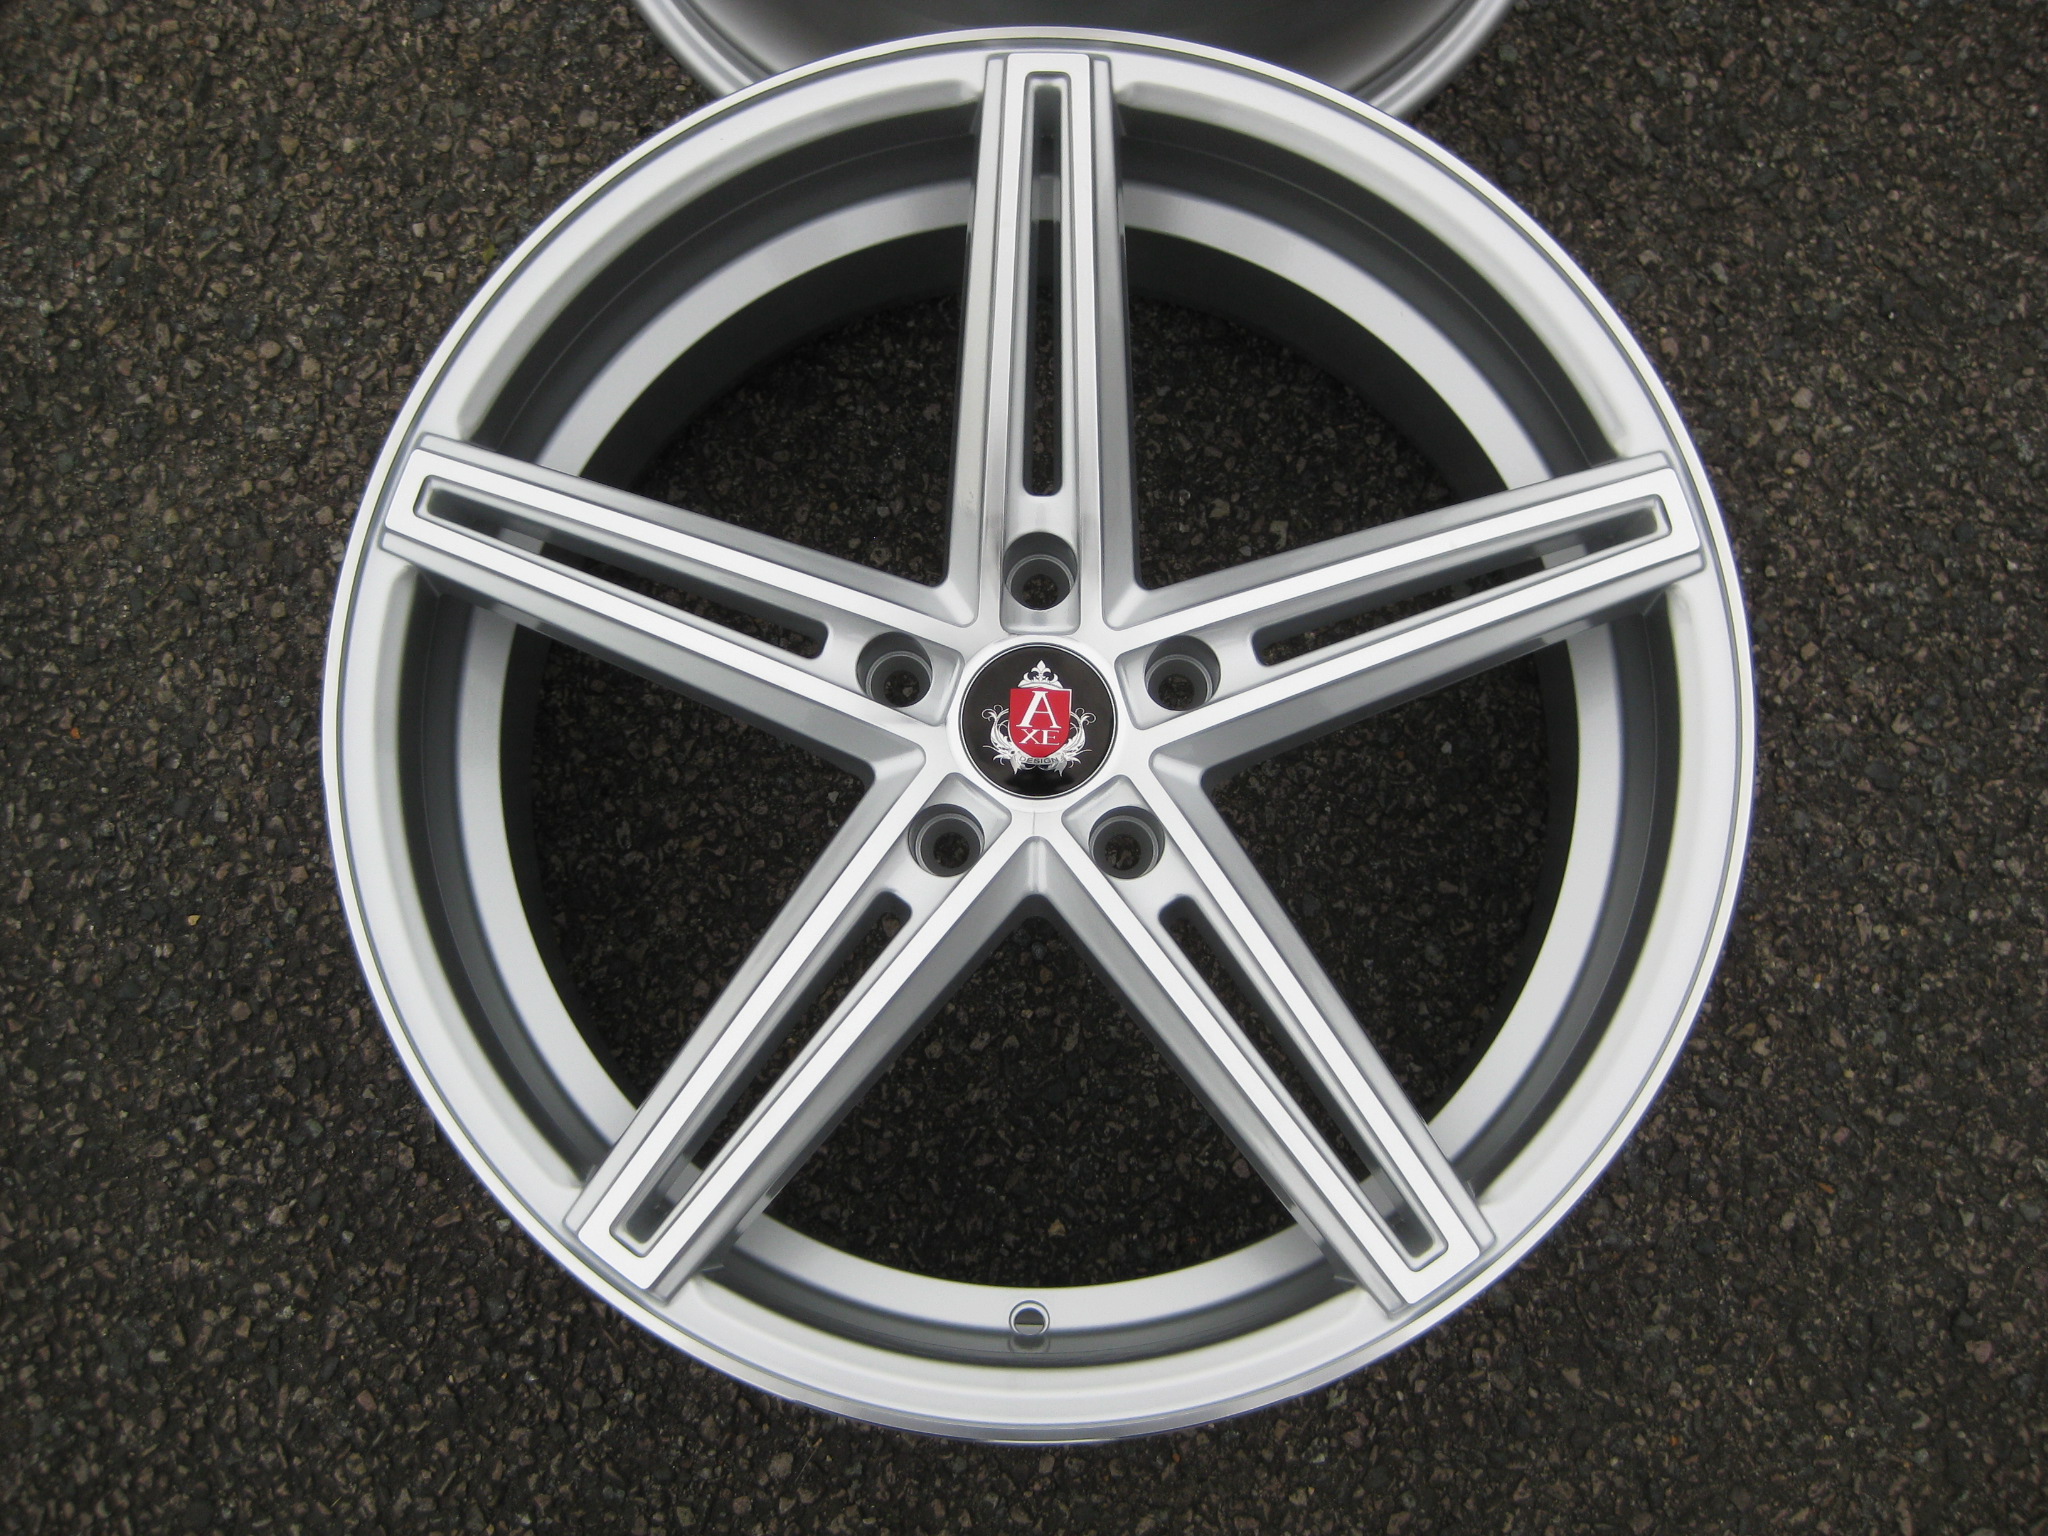 NEW 20  AXE EX14 DEEP CONCAVE ALLOY WHEELS IN SILVER WITH POLISHED FACE AND LIP  WIDER 10 5  REARS et40 42